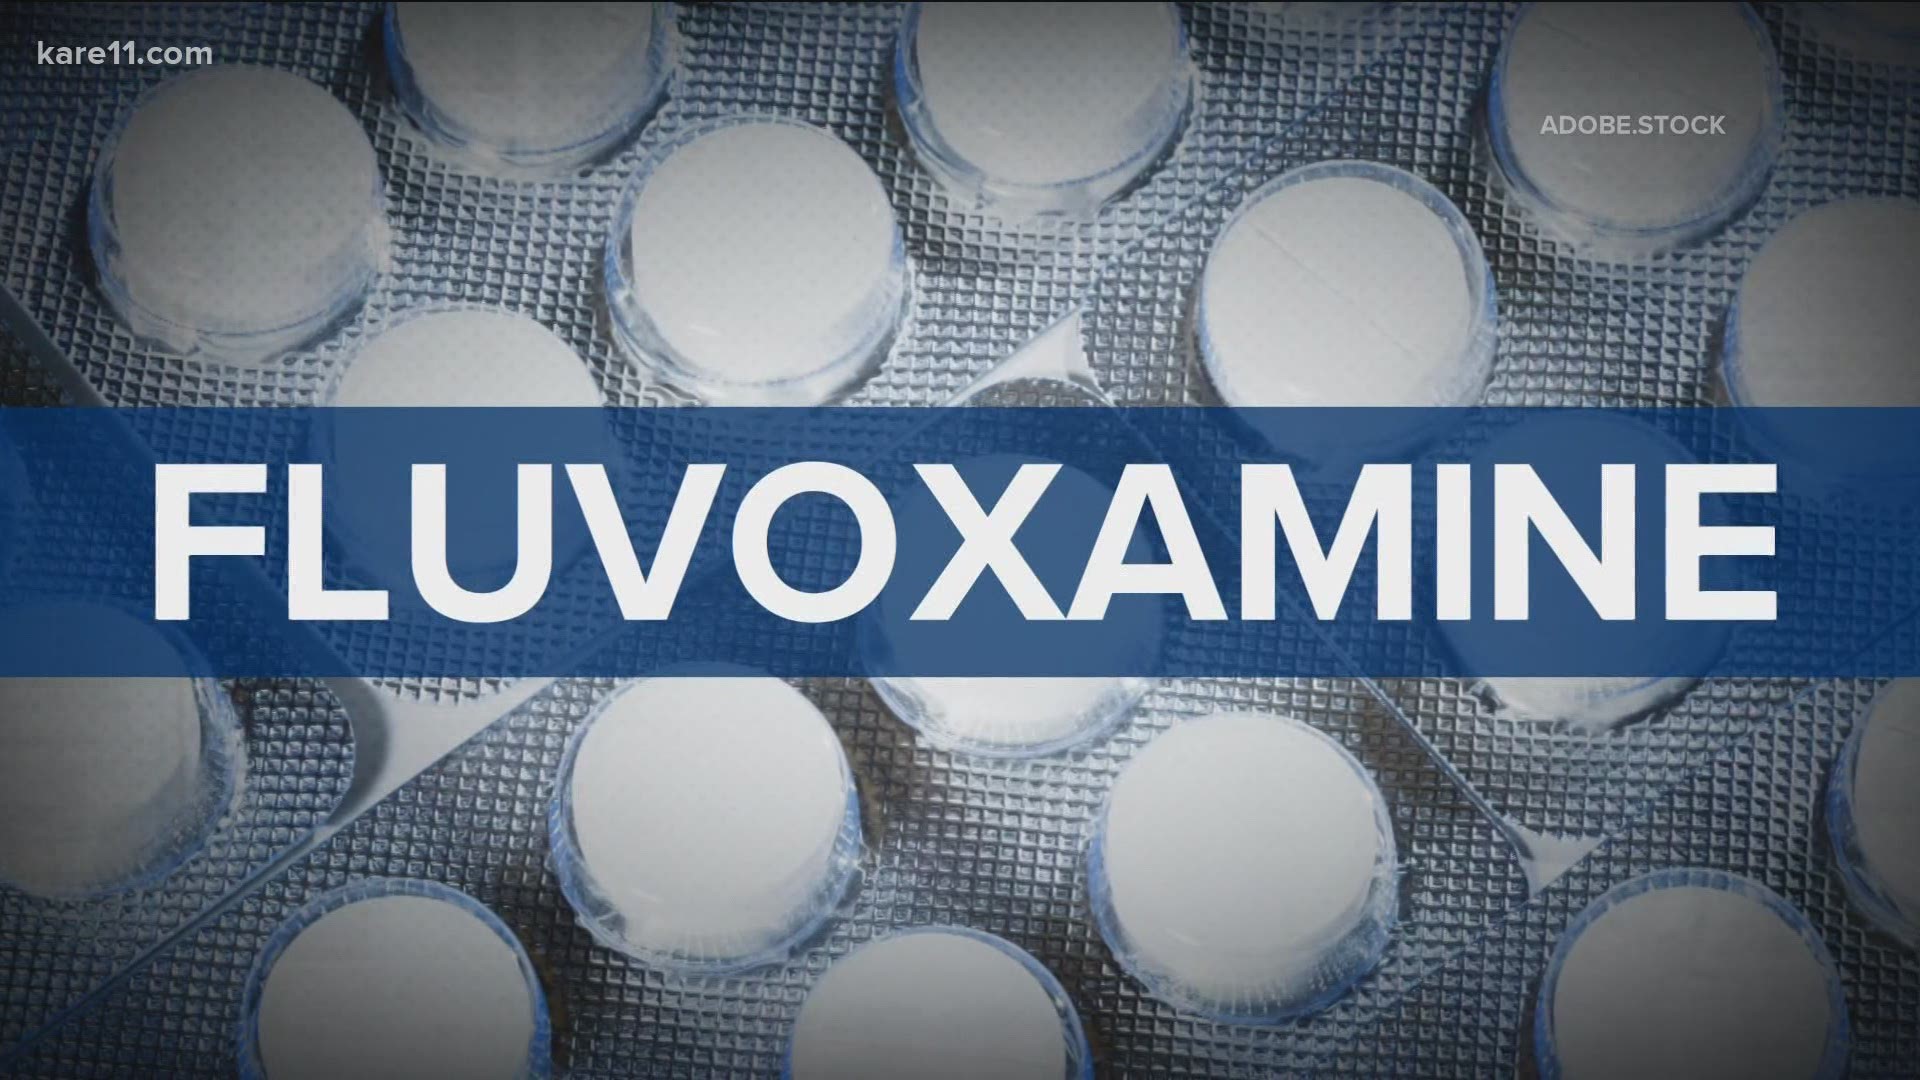 Early studies found COVID patients who took Fluvoxamine avoided hospitalization. Roughly 500 people are still needed for an expanded nationwide trial.